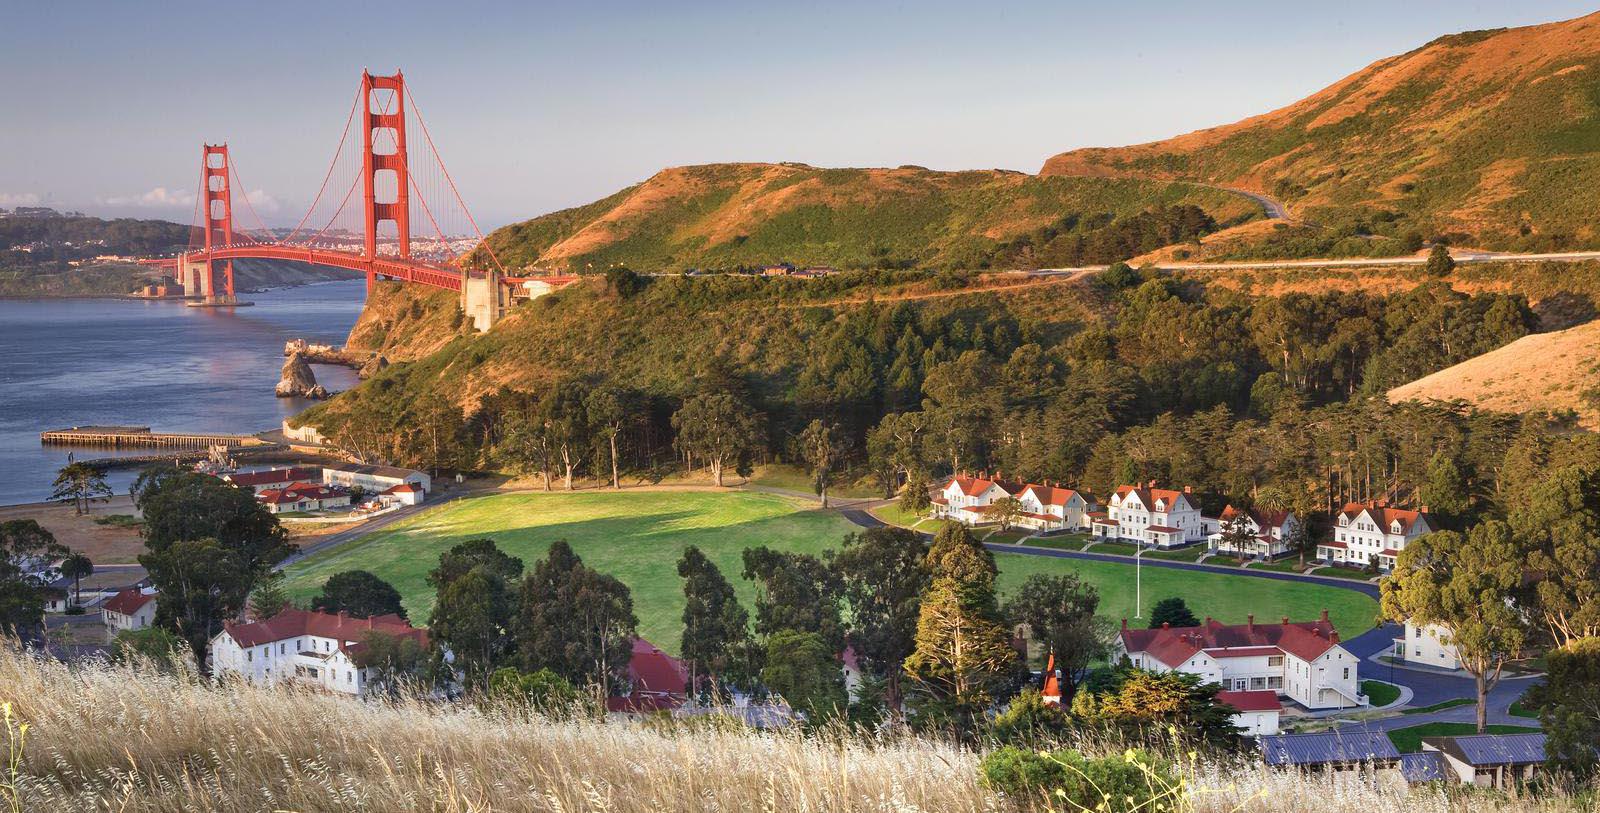 Book a stay at Cavallo Point in San Francisco, CA and get the Best Rate Guarantee